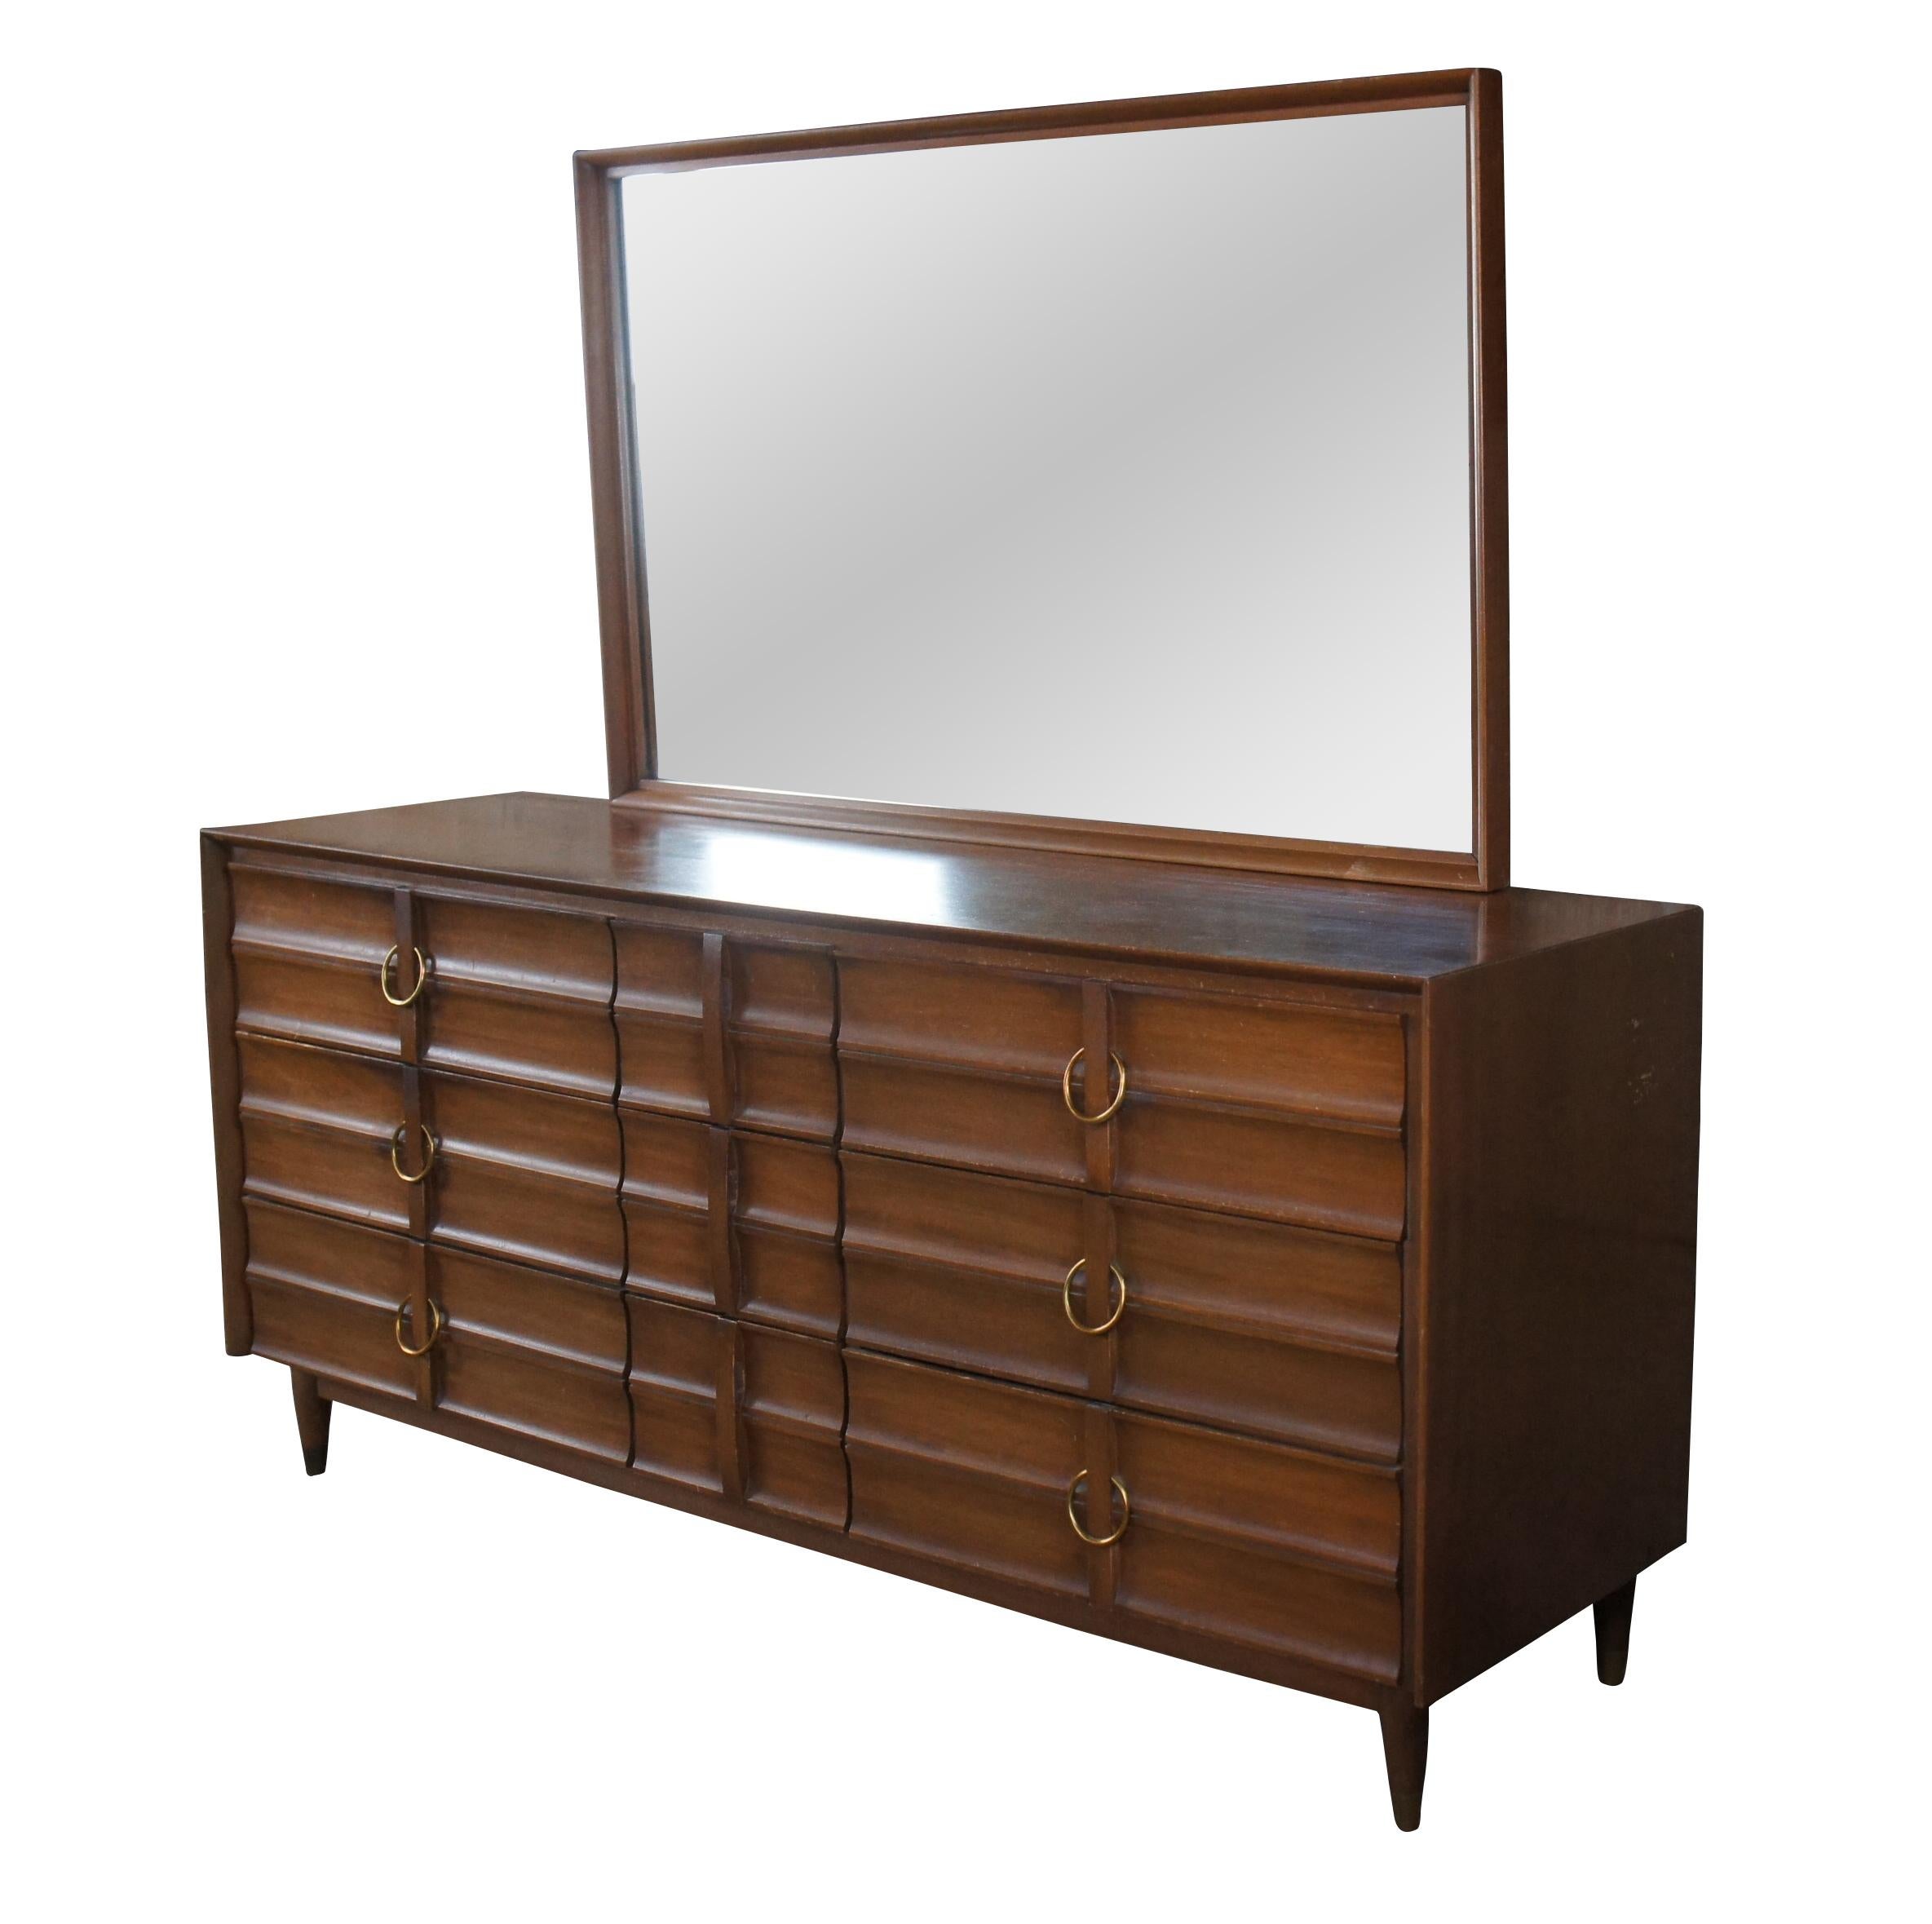 Mid Century Modern Hungerford of Memphis dresser or chest of drawers with vanity mirror.  Made of mahogany featuring nine drawers with brass hardware, capped feet and rectangular mirror.

Hungerford Furniture was known for choosing Elvis to be the